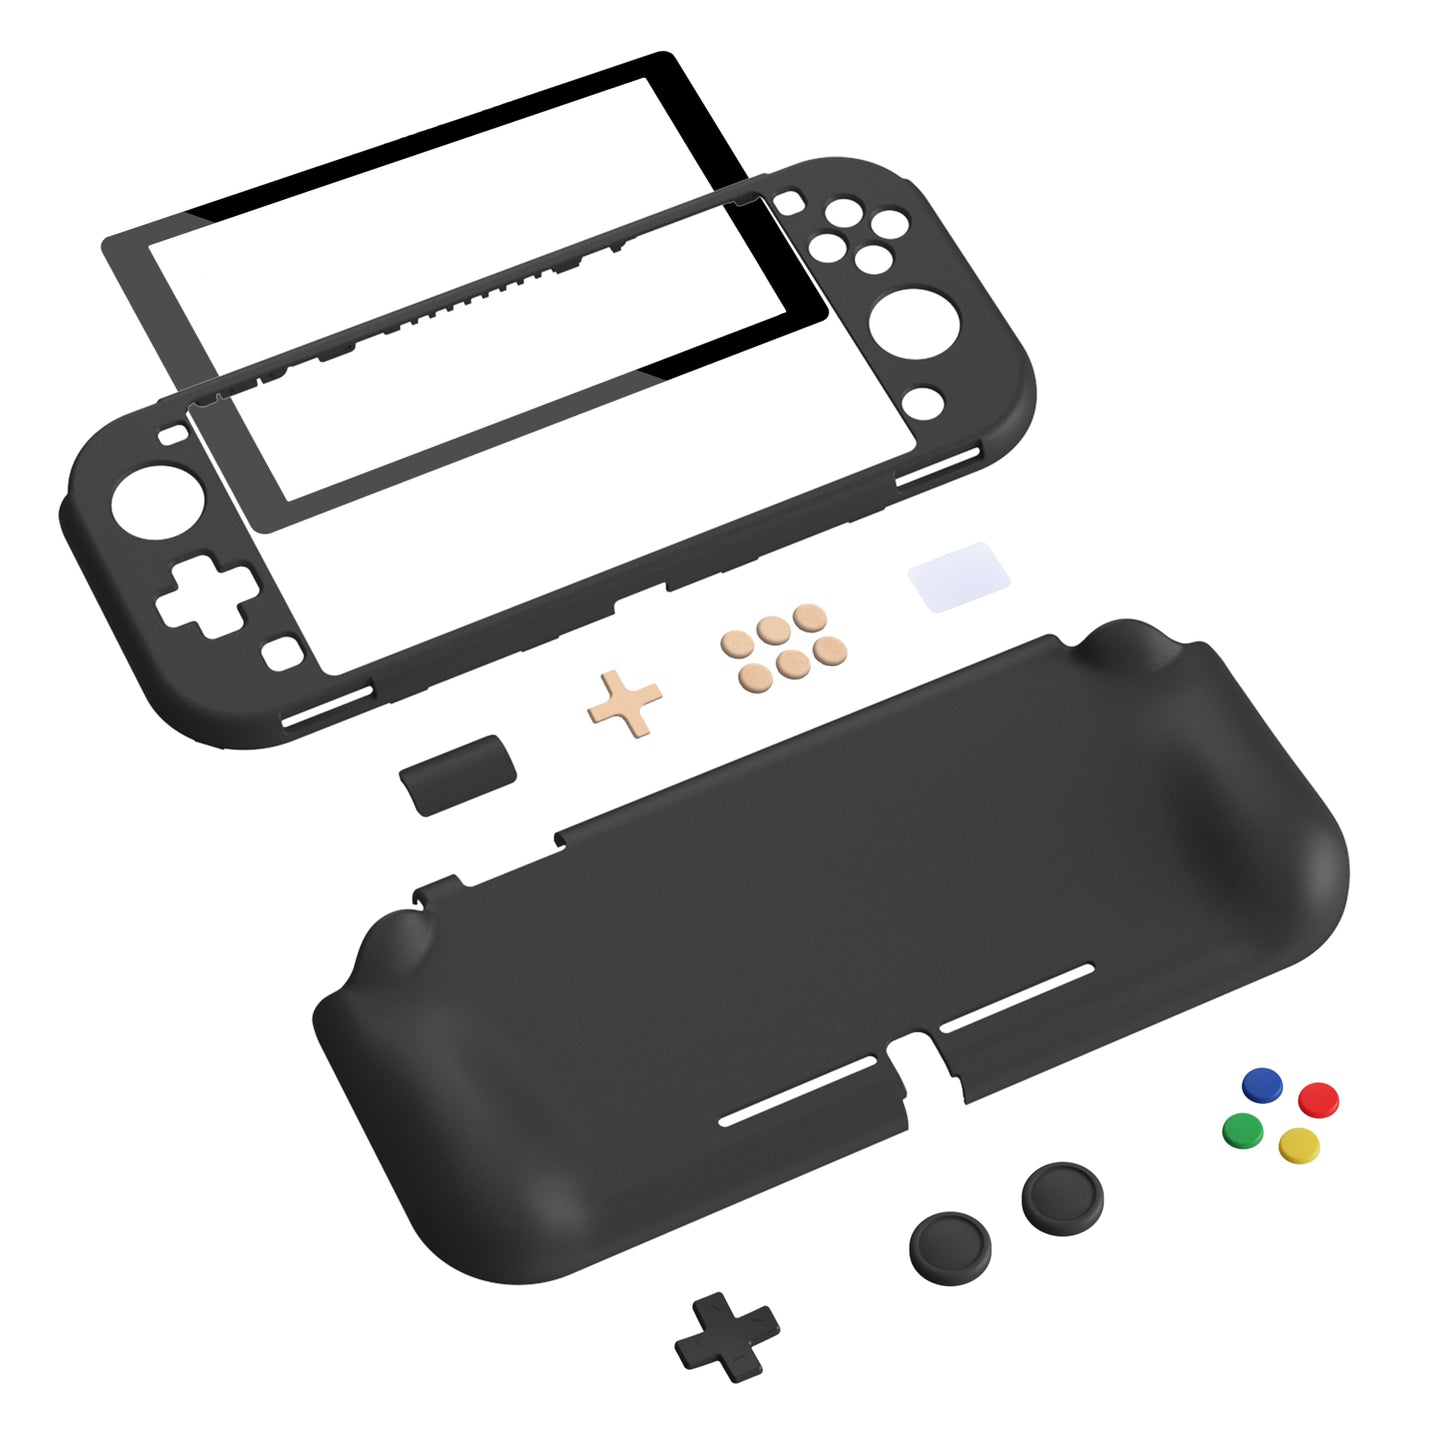 PlayVital ZealProtect Protective Case for Nintendo Switch Lite, Hard Shell Ergonomic Grip Cover for Nintendo Switch Lite w/Screen Protector & Thumb Grip Caps & Button Caps - Black - PSLYP3007 playvital